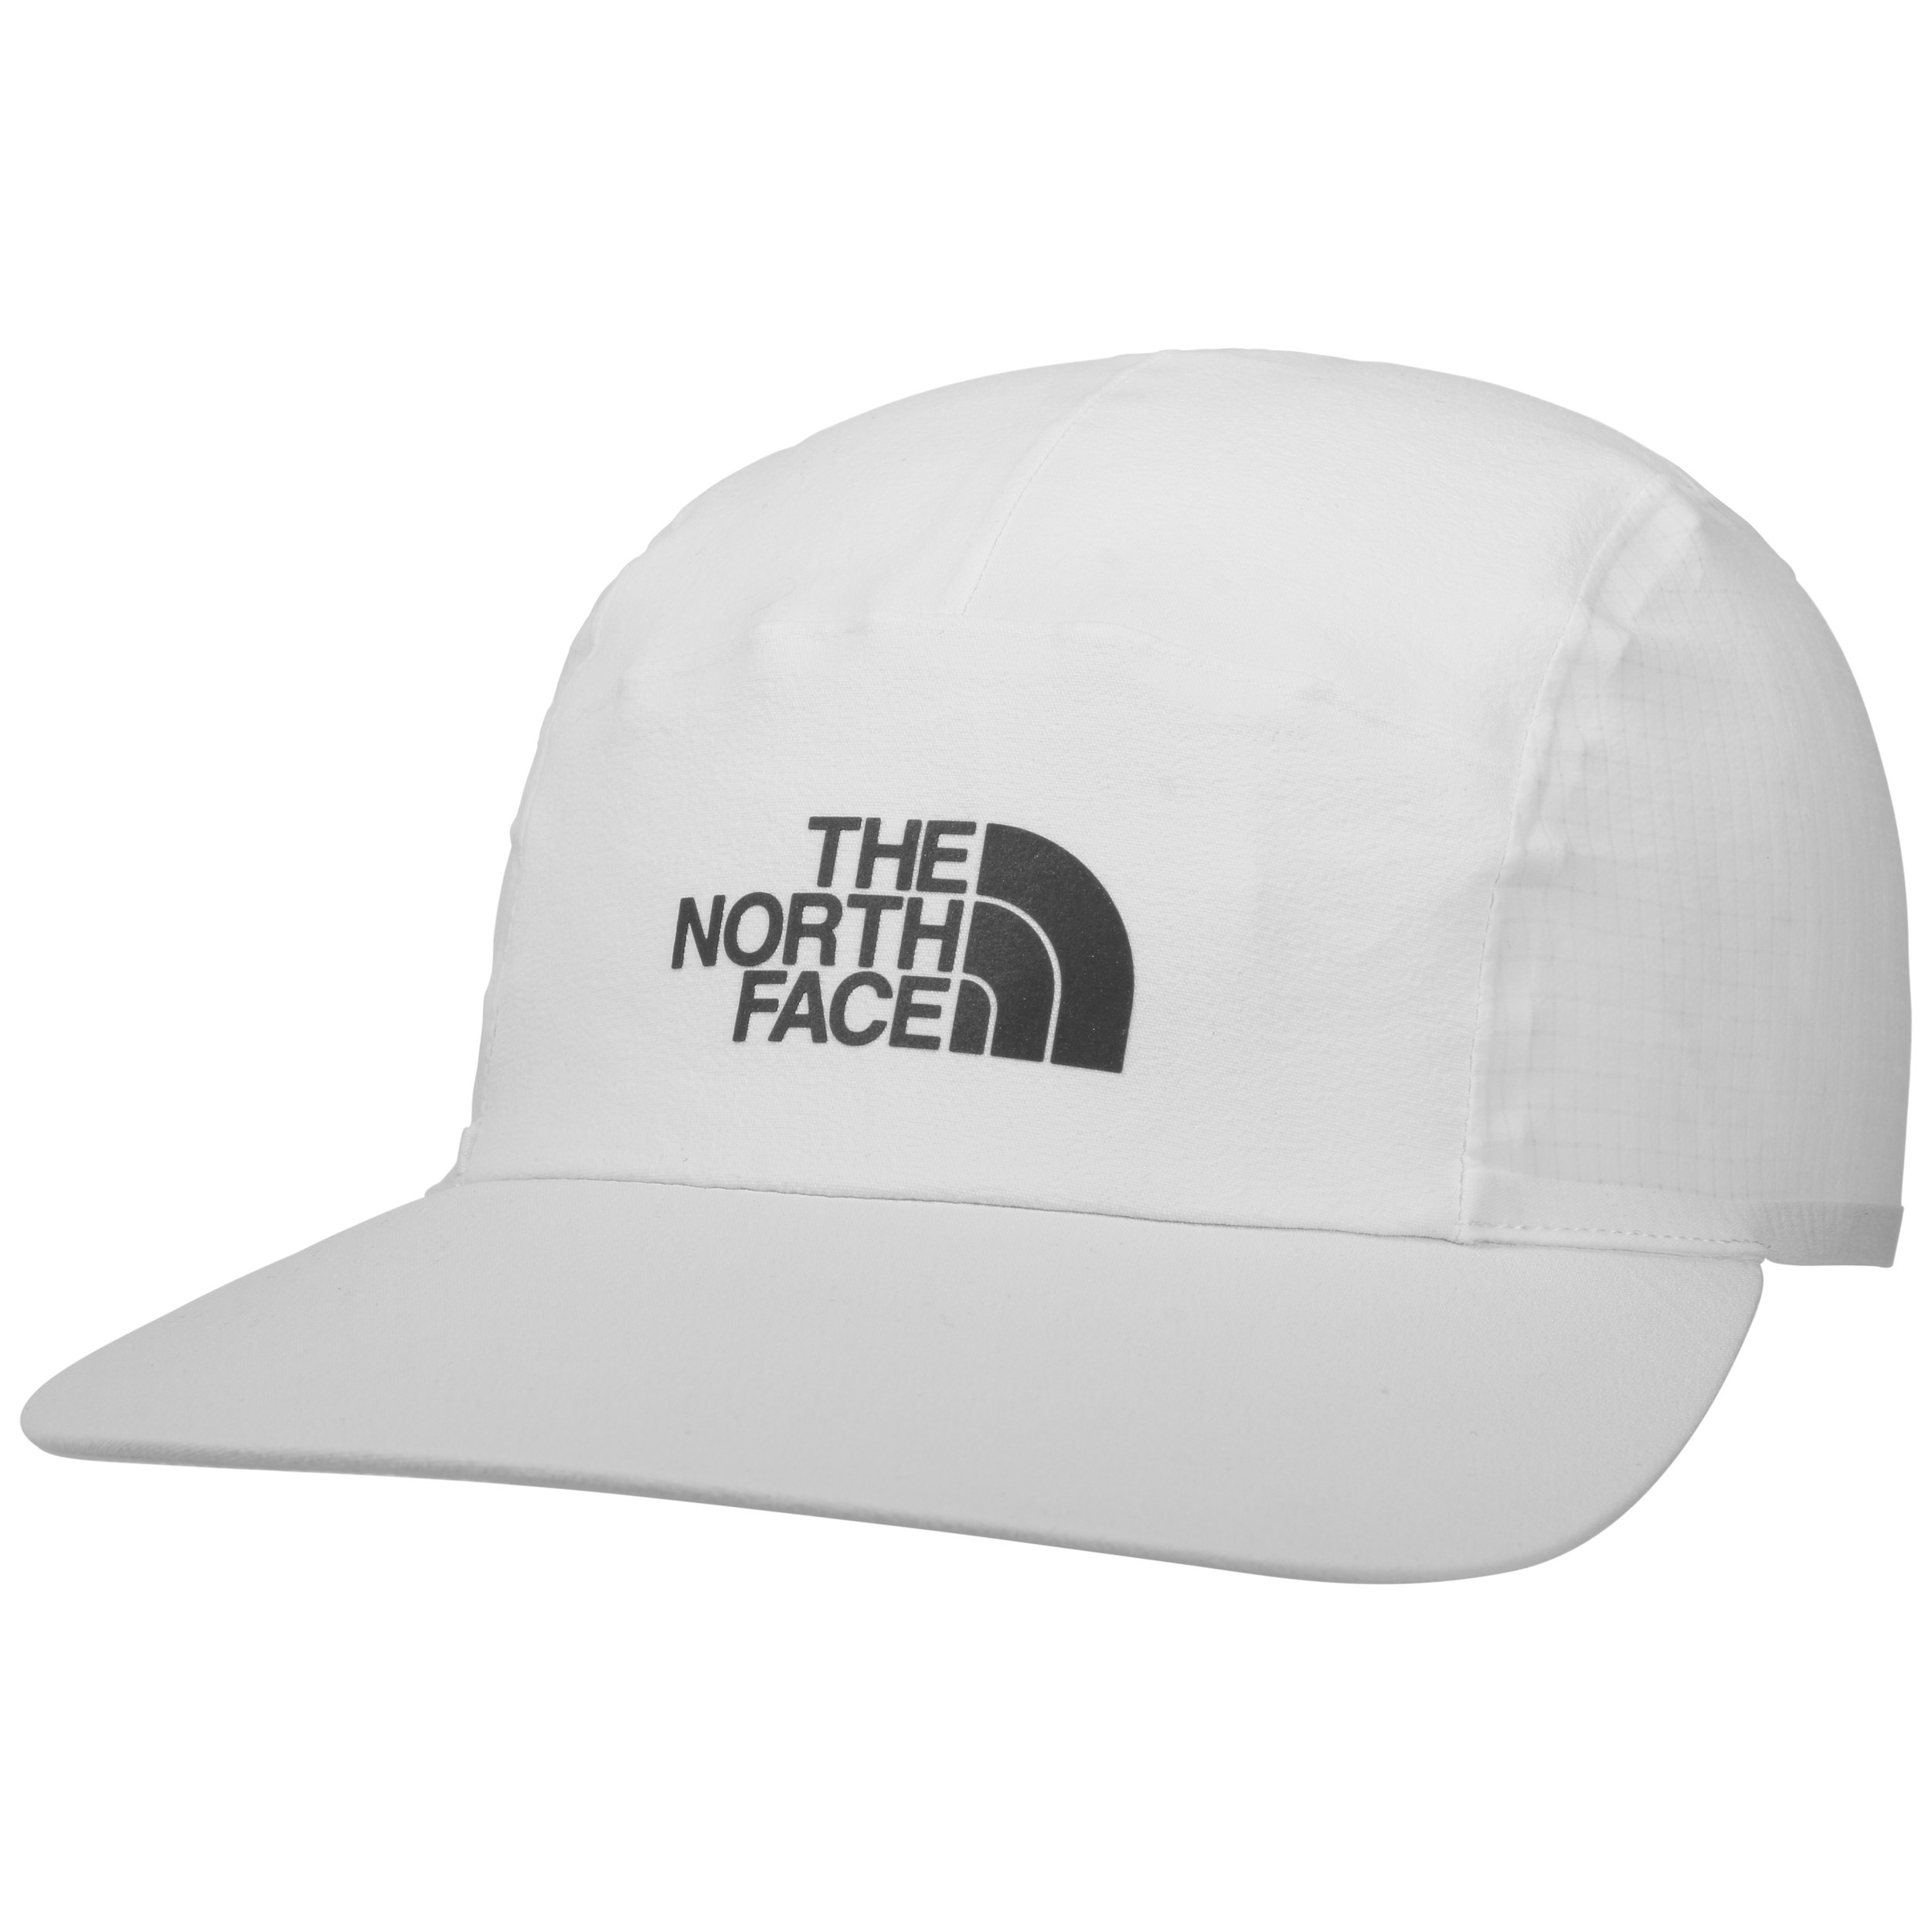 the north face t ball